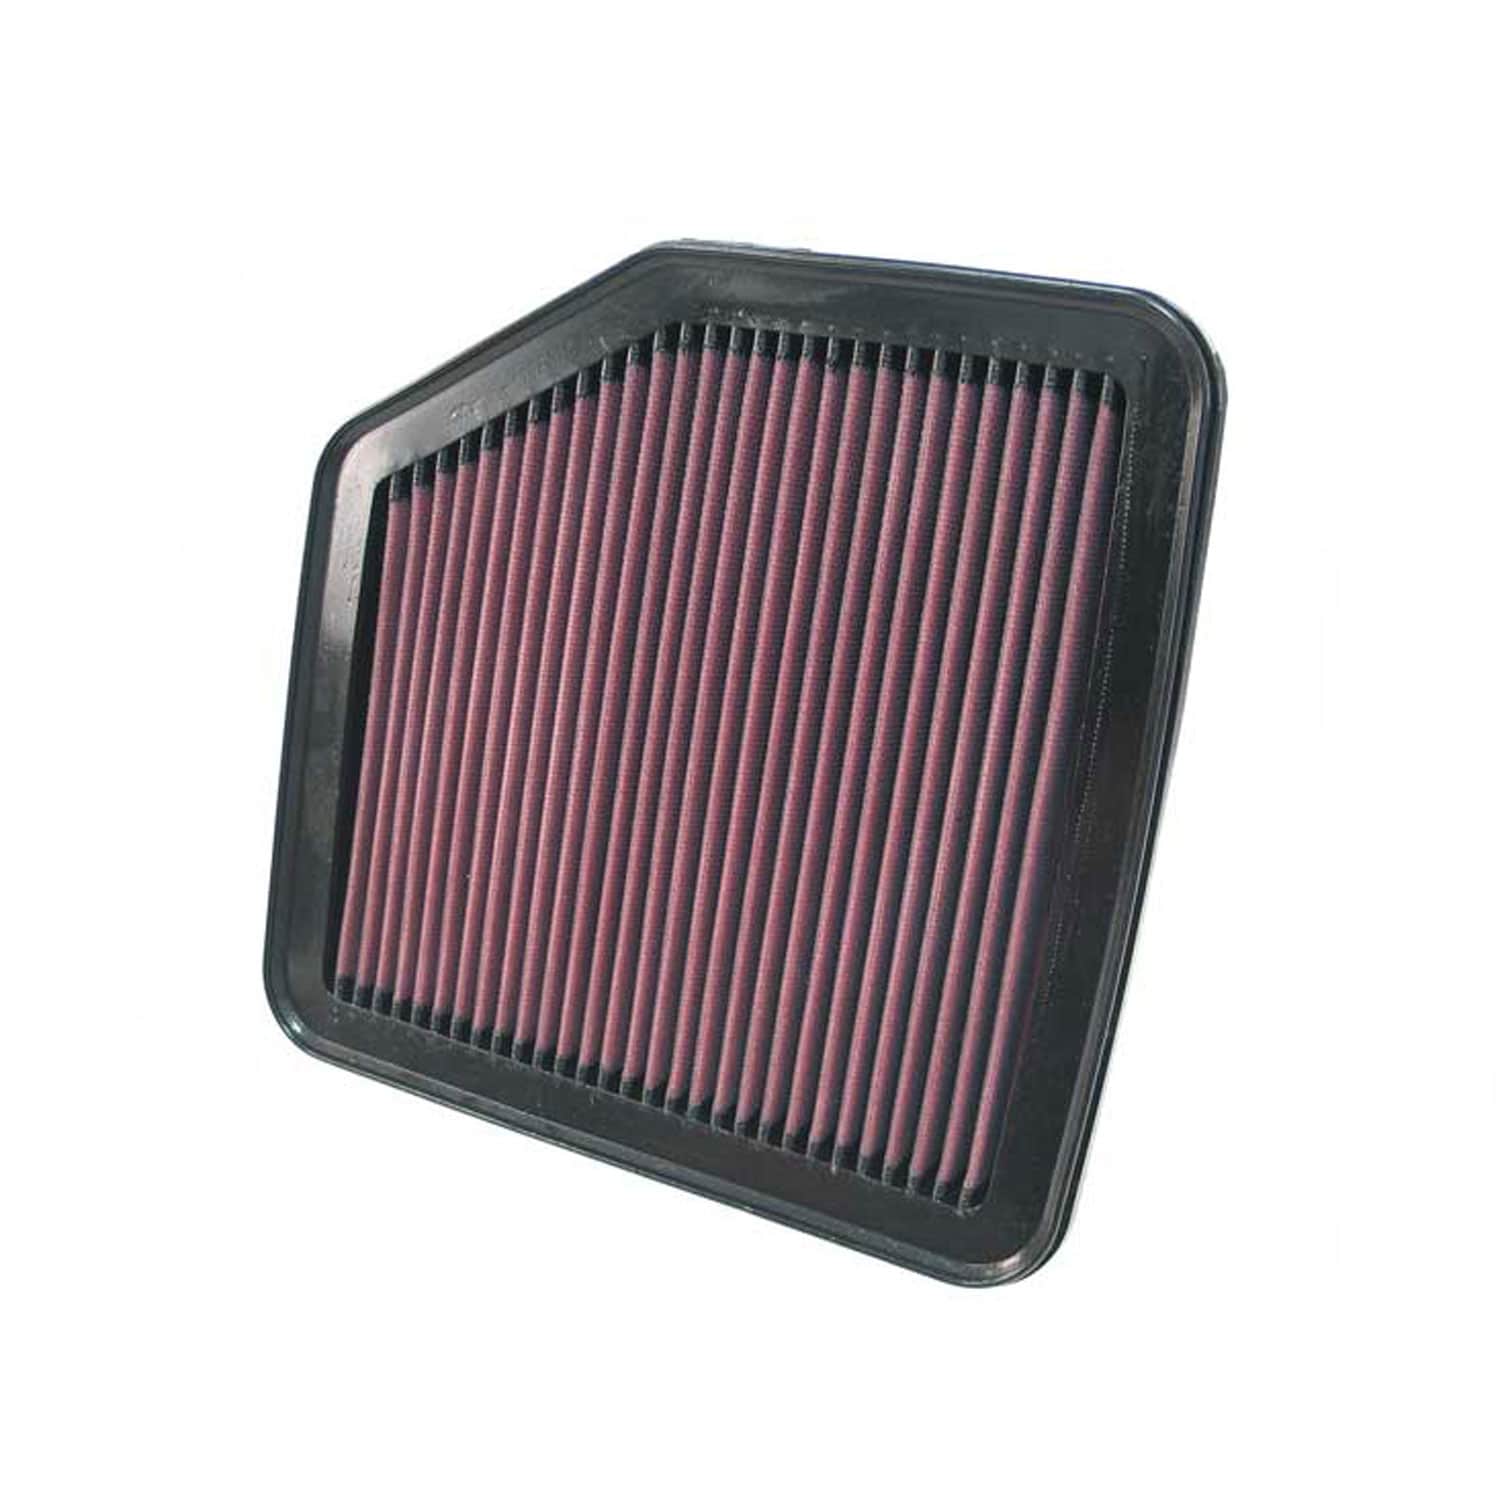 K&N K&N Engine Air Filter: High Performance, Premium, Washable, Replacement Filter: 2004-2015 Toyota/Lexus (Crown Royal, Rav4, Reiz, Mark X, IS 250, IS 350, IS 220, GS 350, IS 300, GS 430), 33-2345